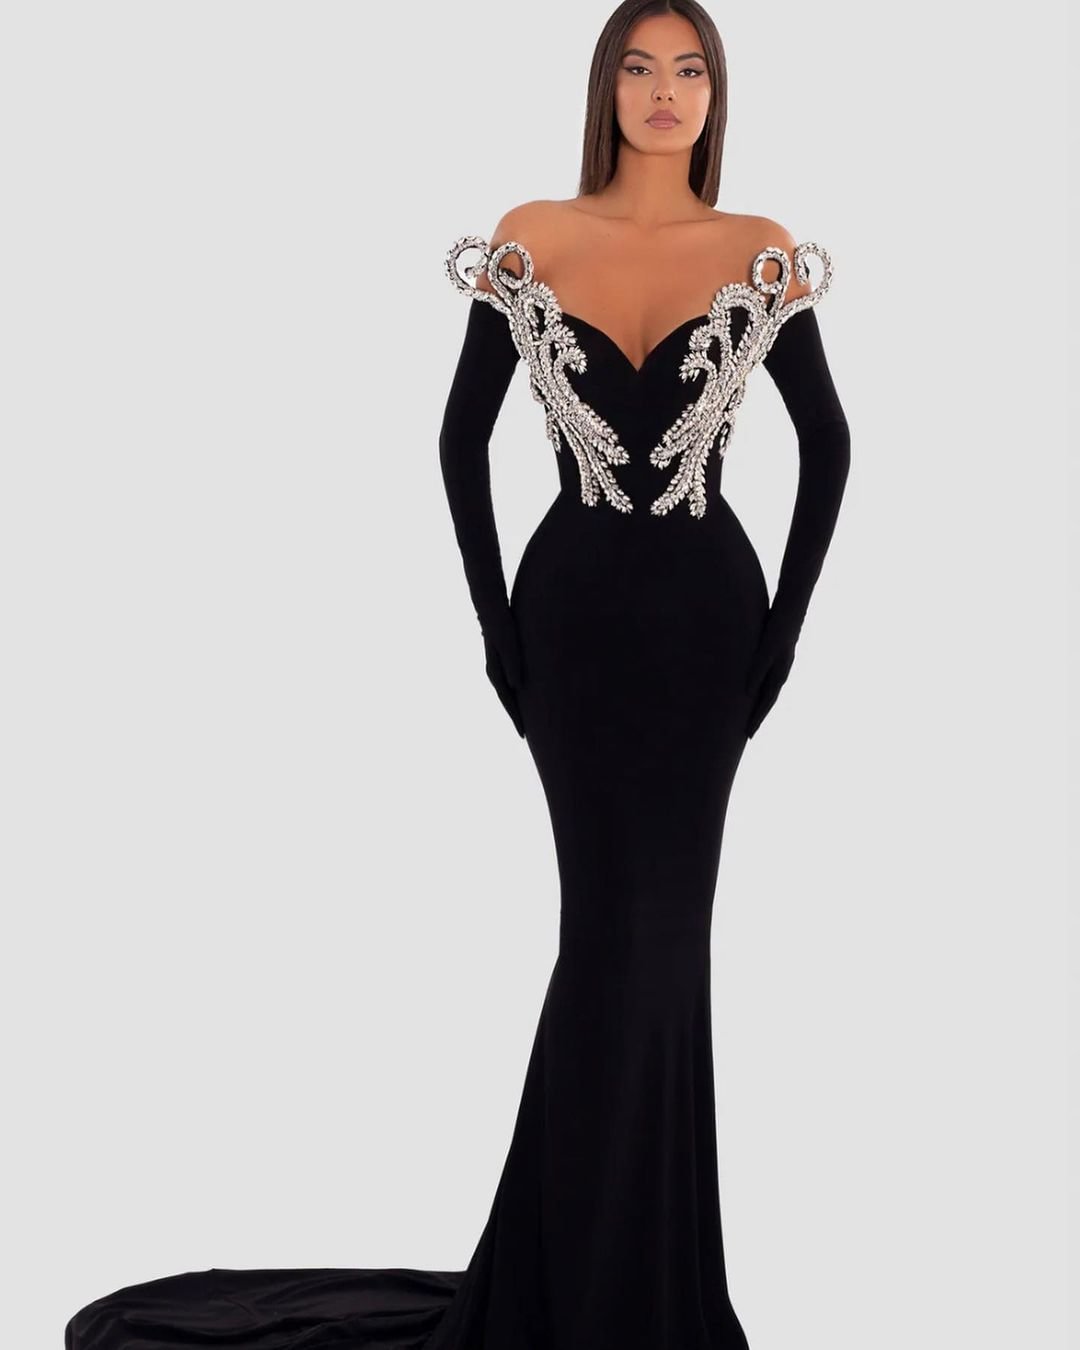 Daisda Black Sweetheart Mermaid Long Sleeve Prom Gown Dress with Gloves